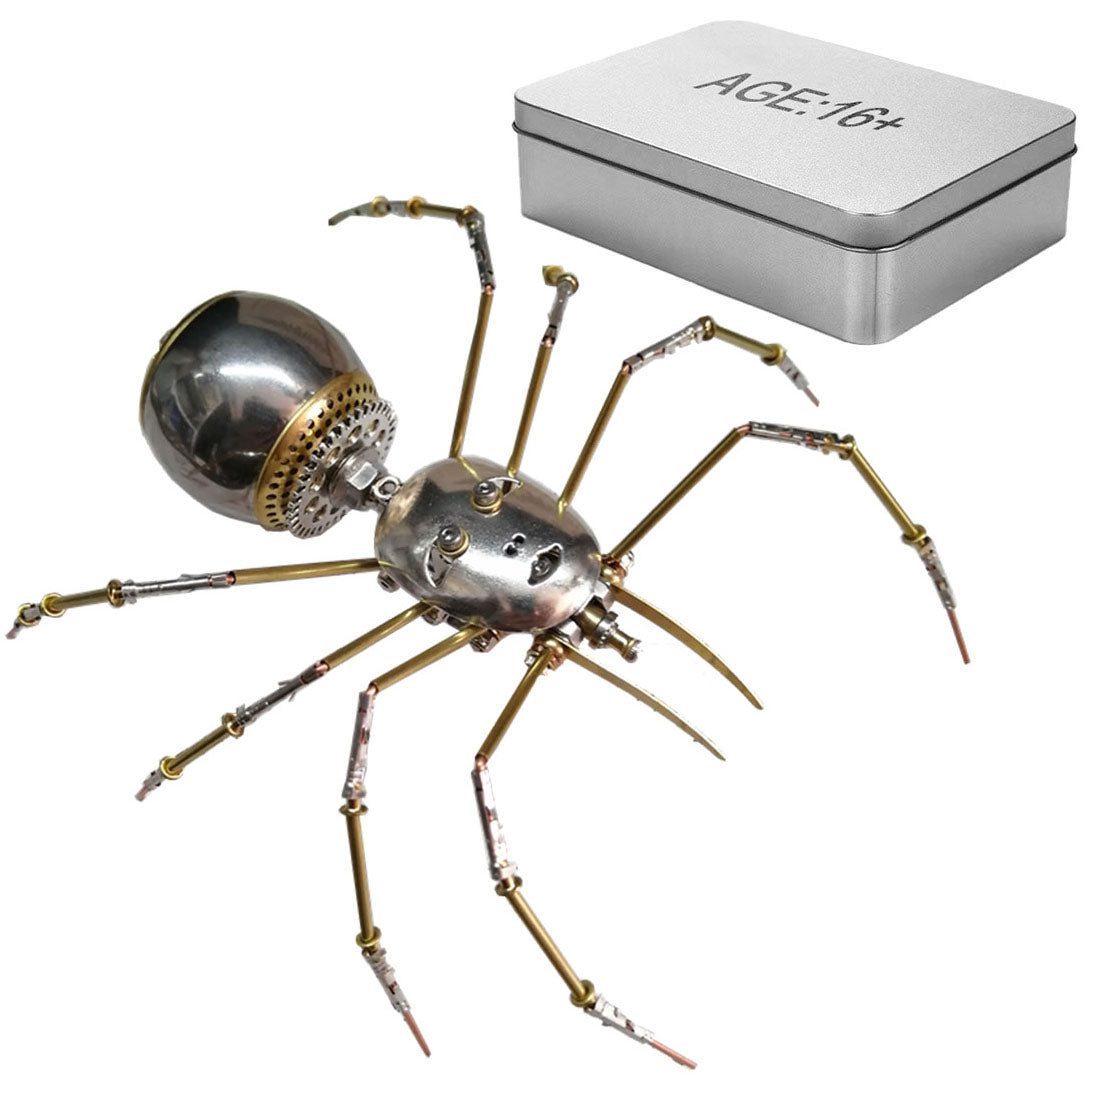 3D Metal Puzzle Human-faced Spider Mechanical Insect Assembly Model 130+PCS